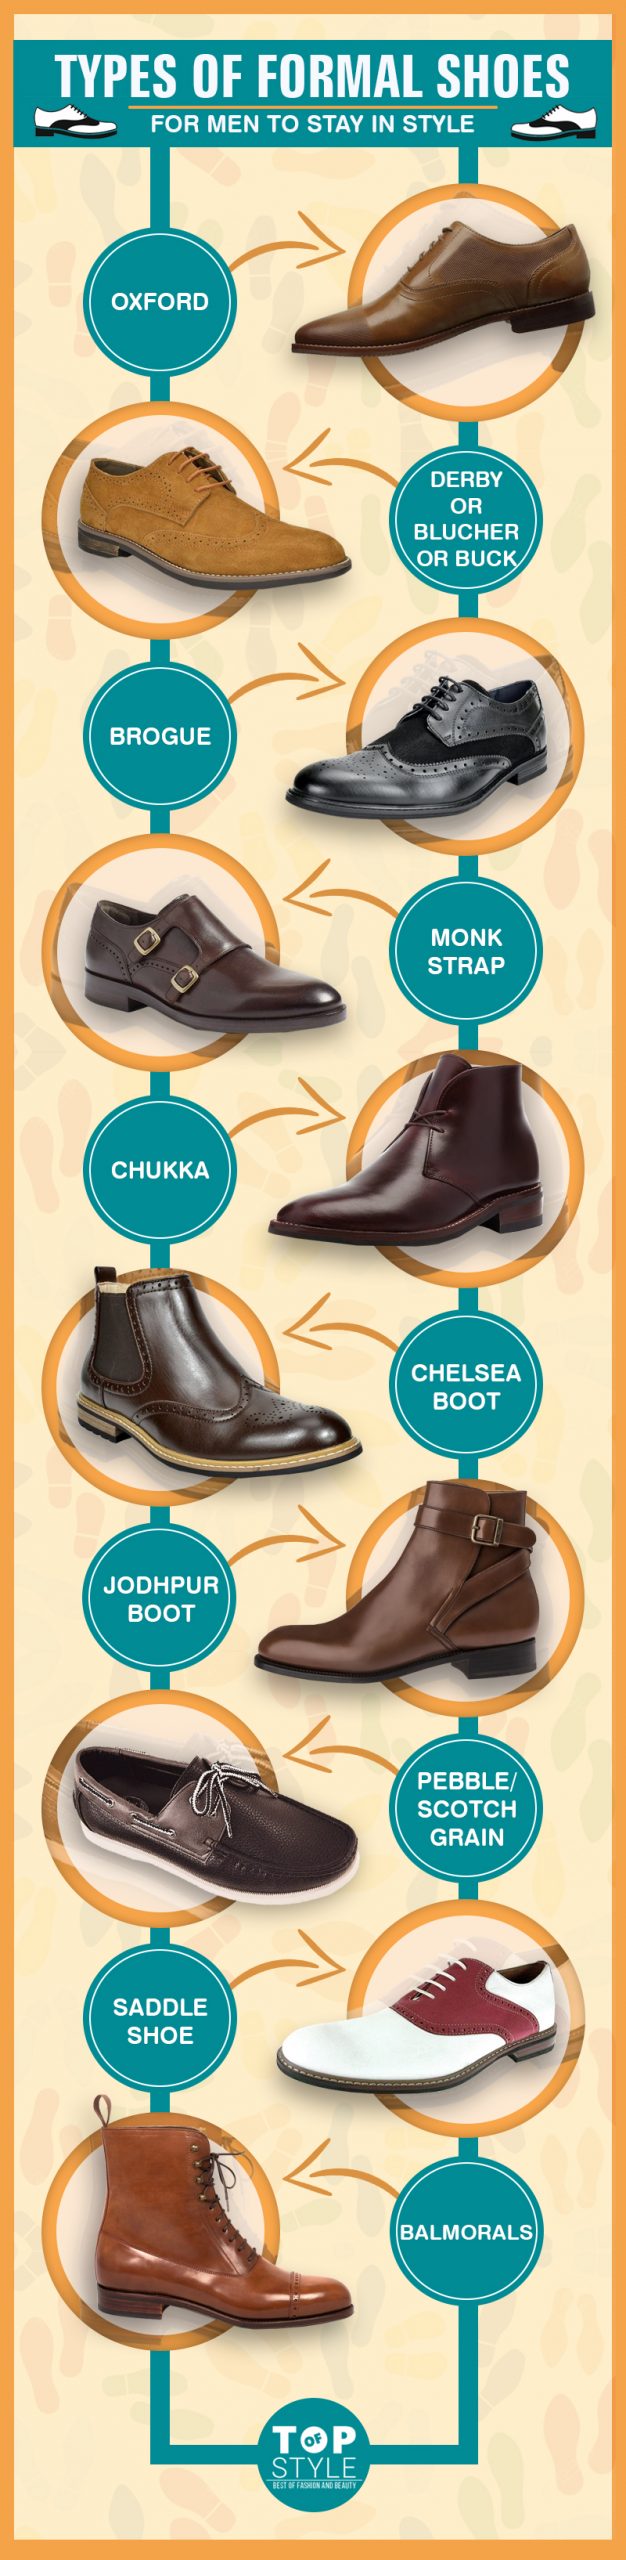 different types of formal shoes